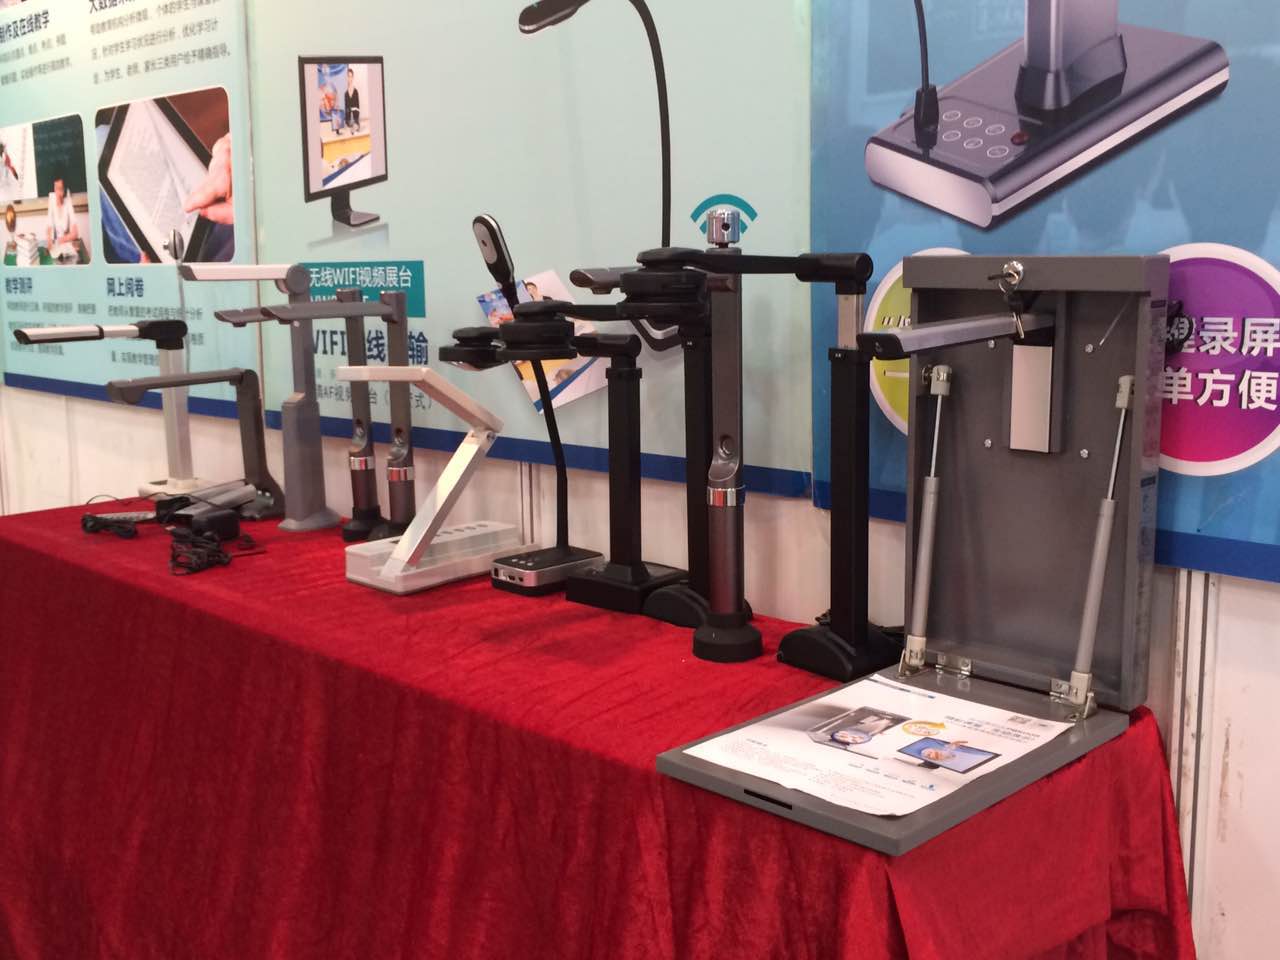 High speed portable document scanner debuted exhibition site 